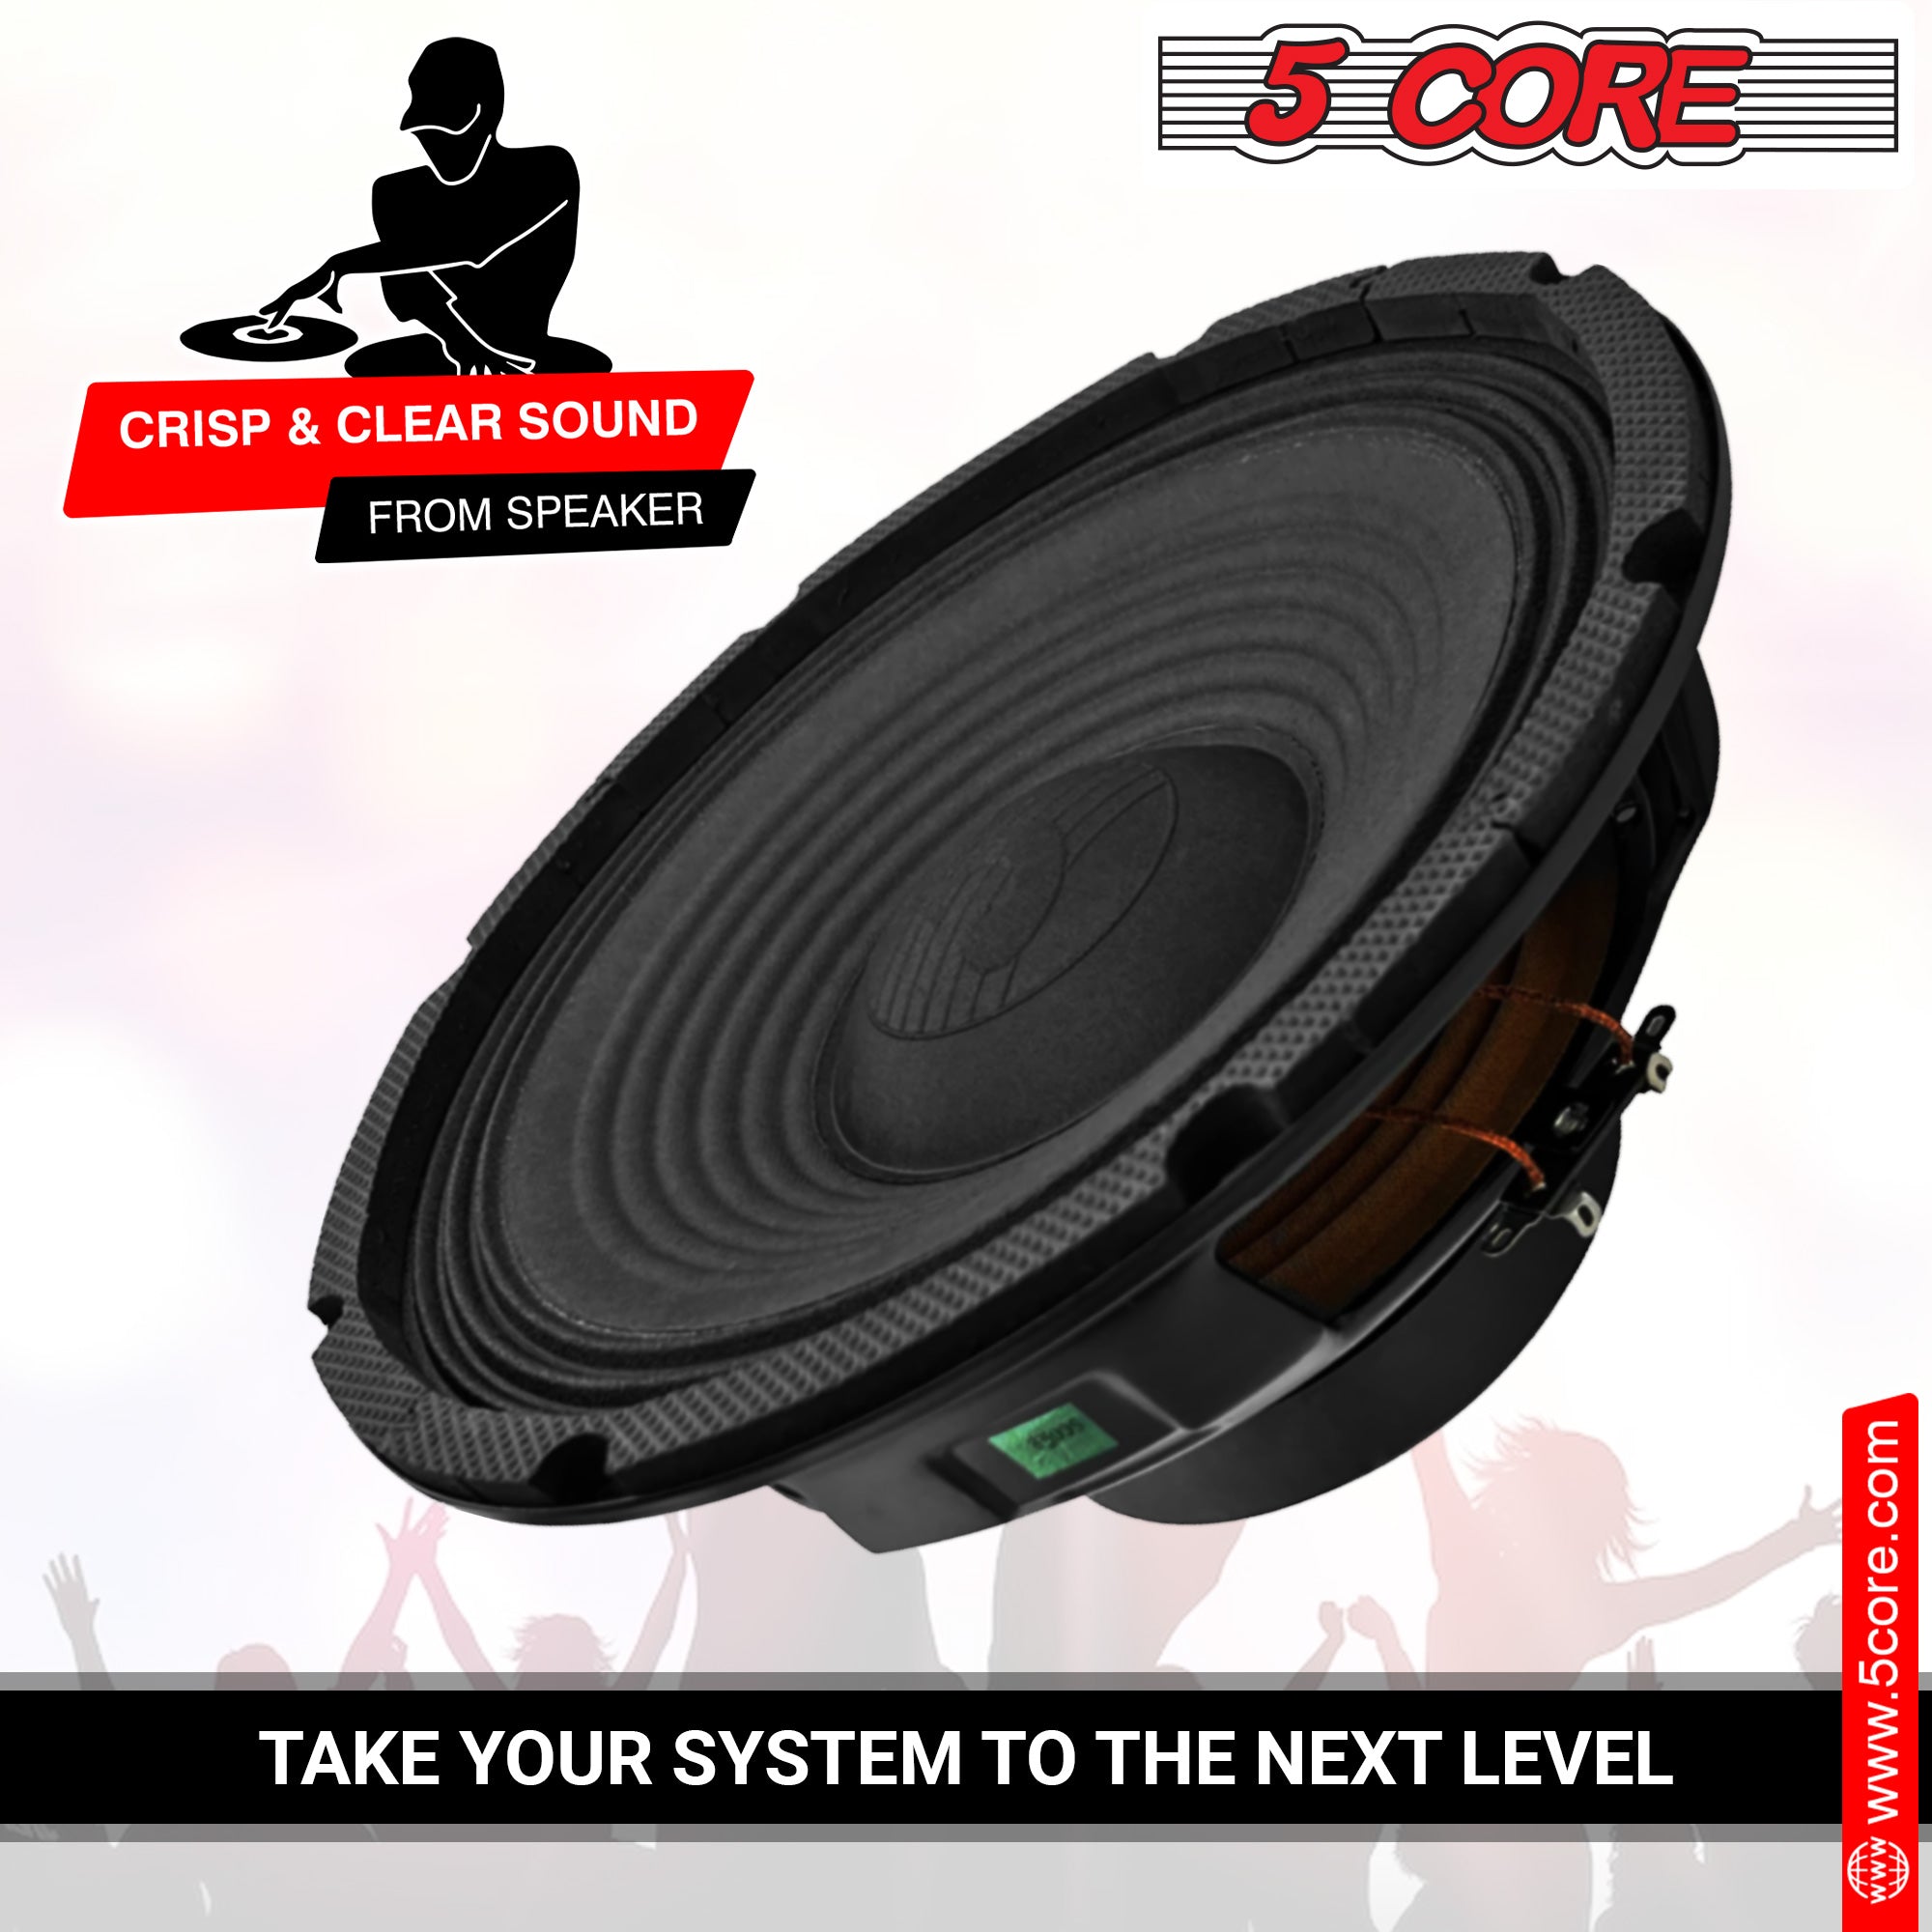 10" replacement speaker take your system to the next level.